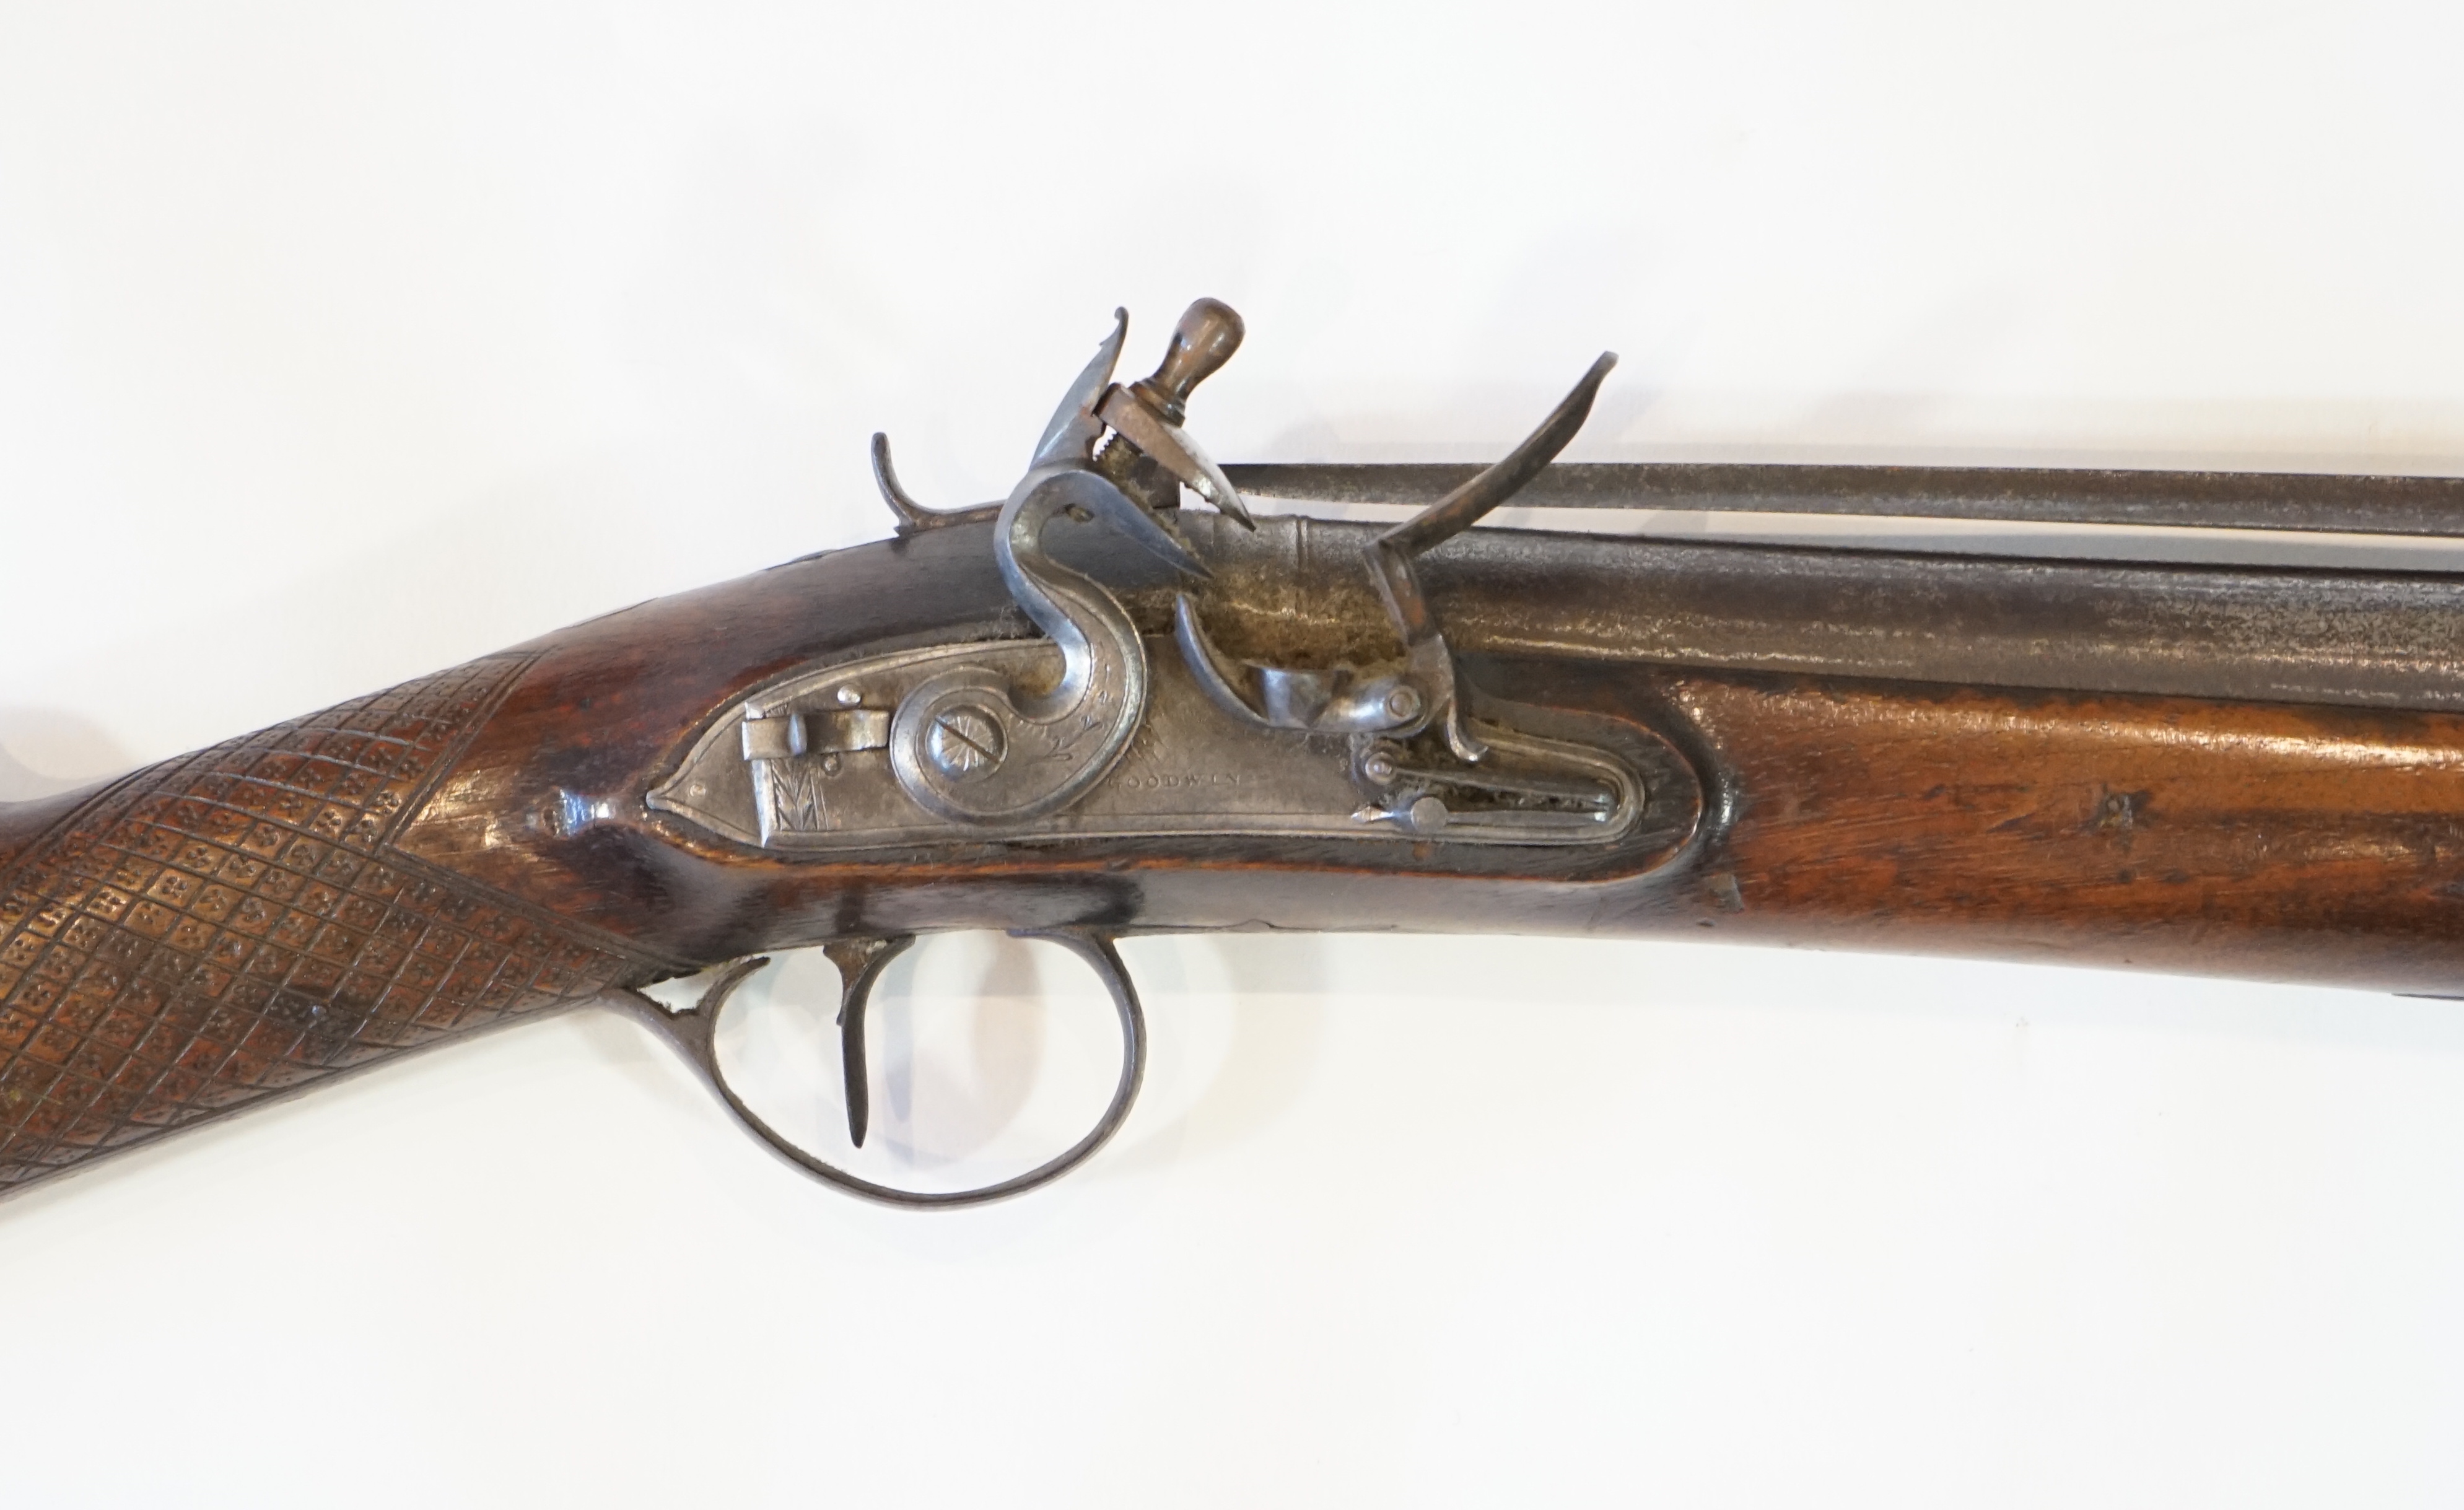 An iron barrelled flintlock blunderbuss by Goodwin of London, fitted with a top spring bayonet